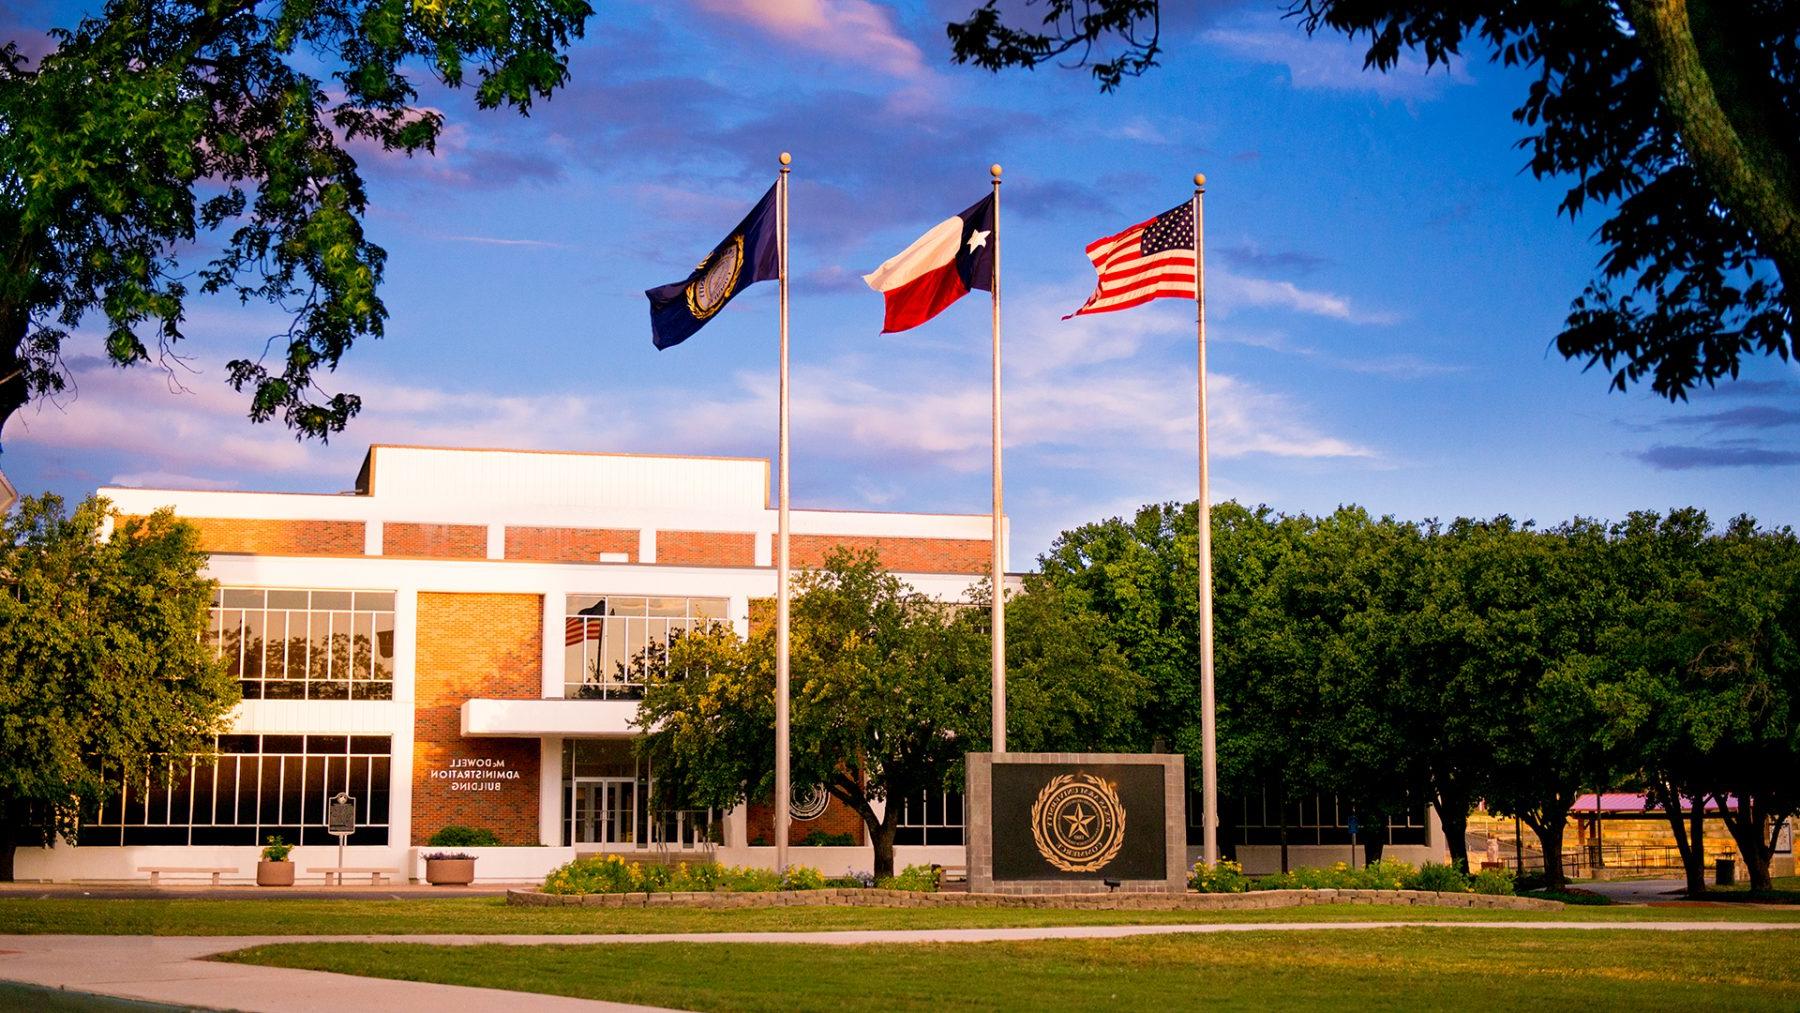 Three flag poles and the university symbol in front to the administration building on campus.